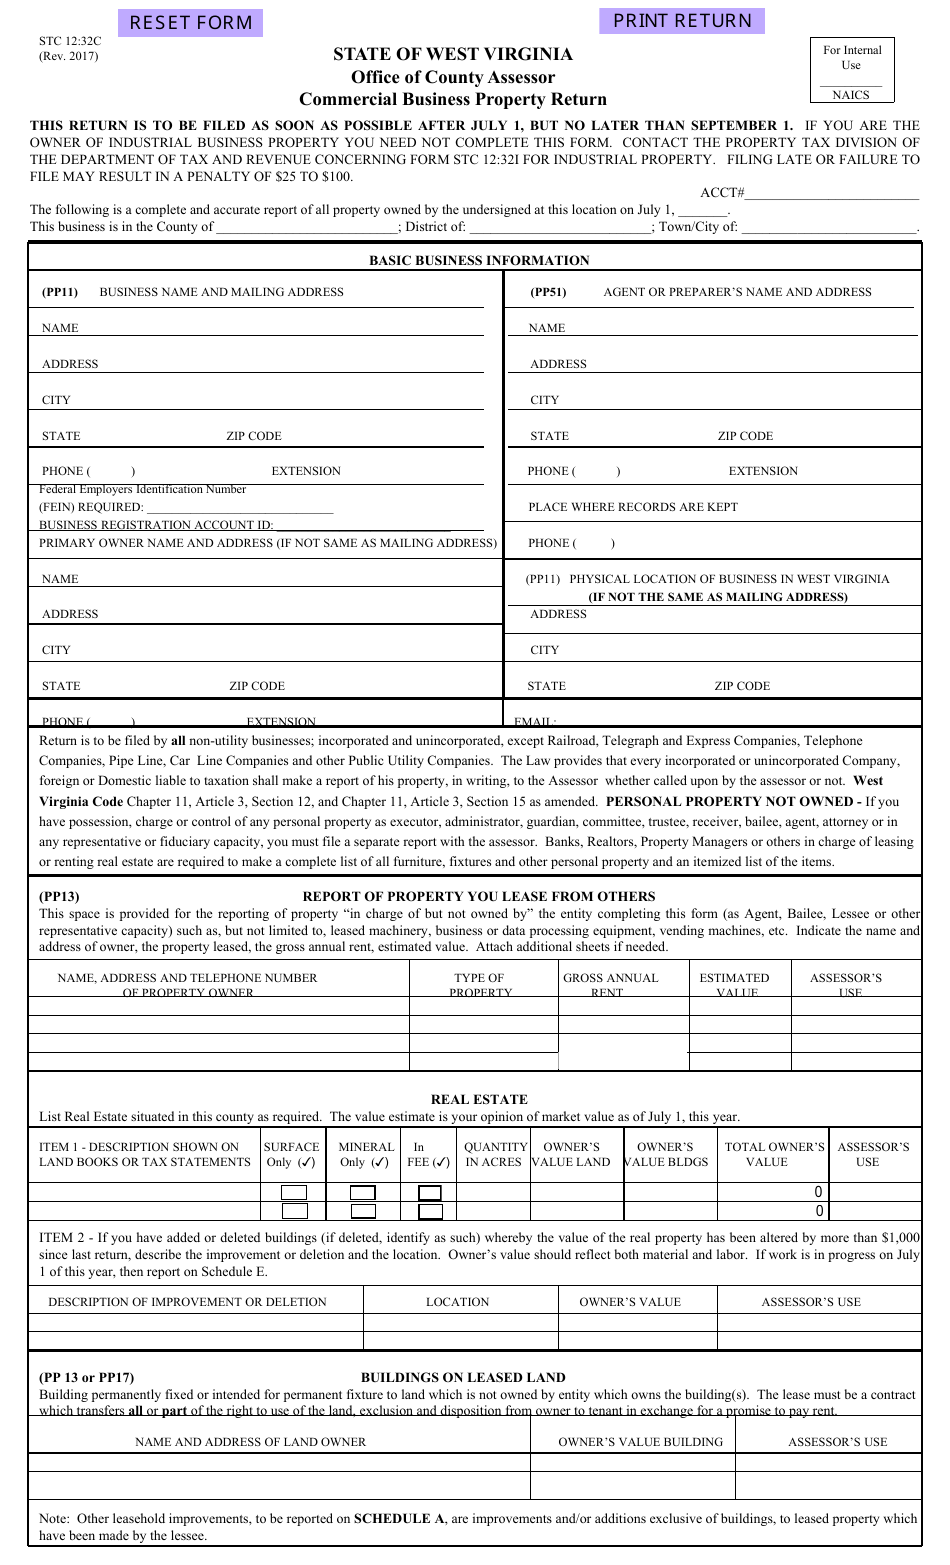 Form STC12:32C Commercial Business Property Return - West Virginia, Page 1